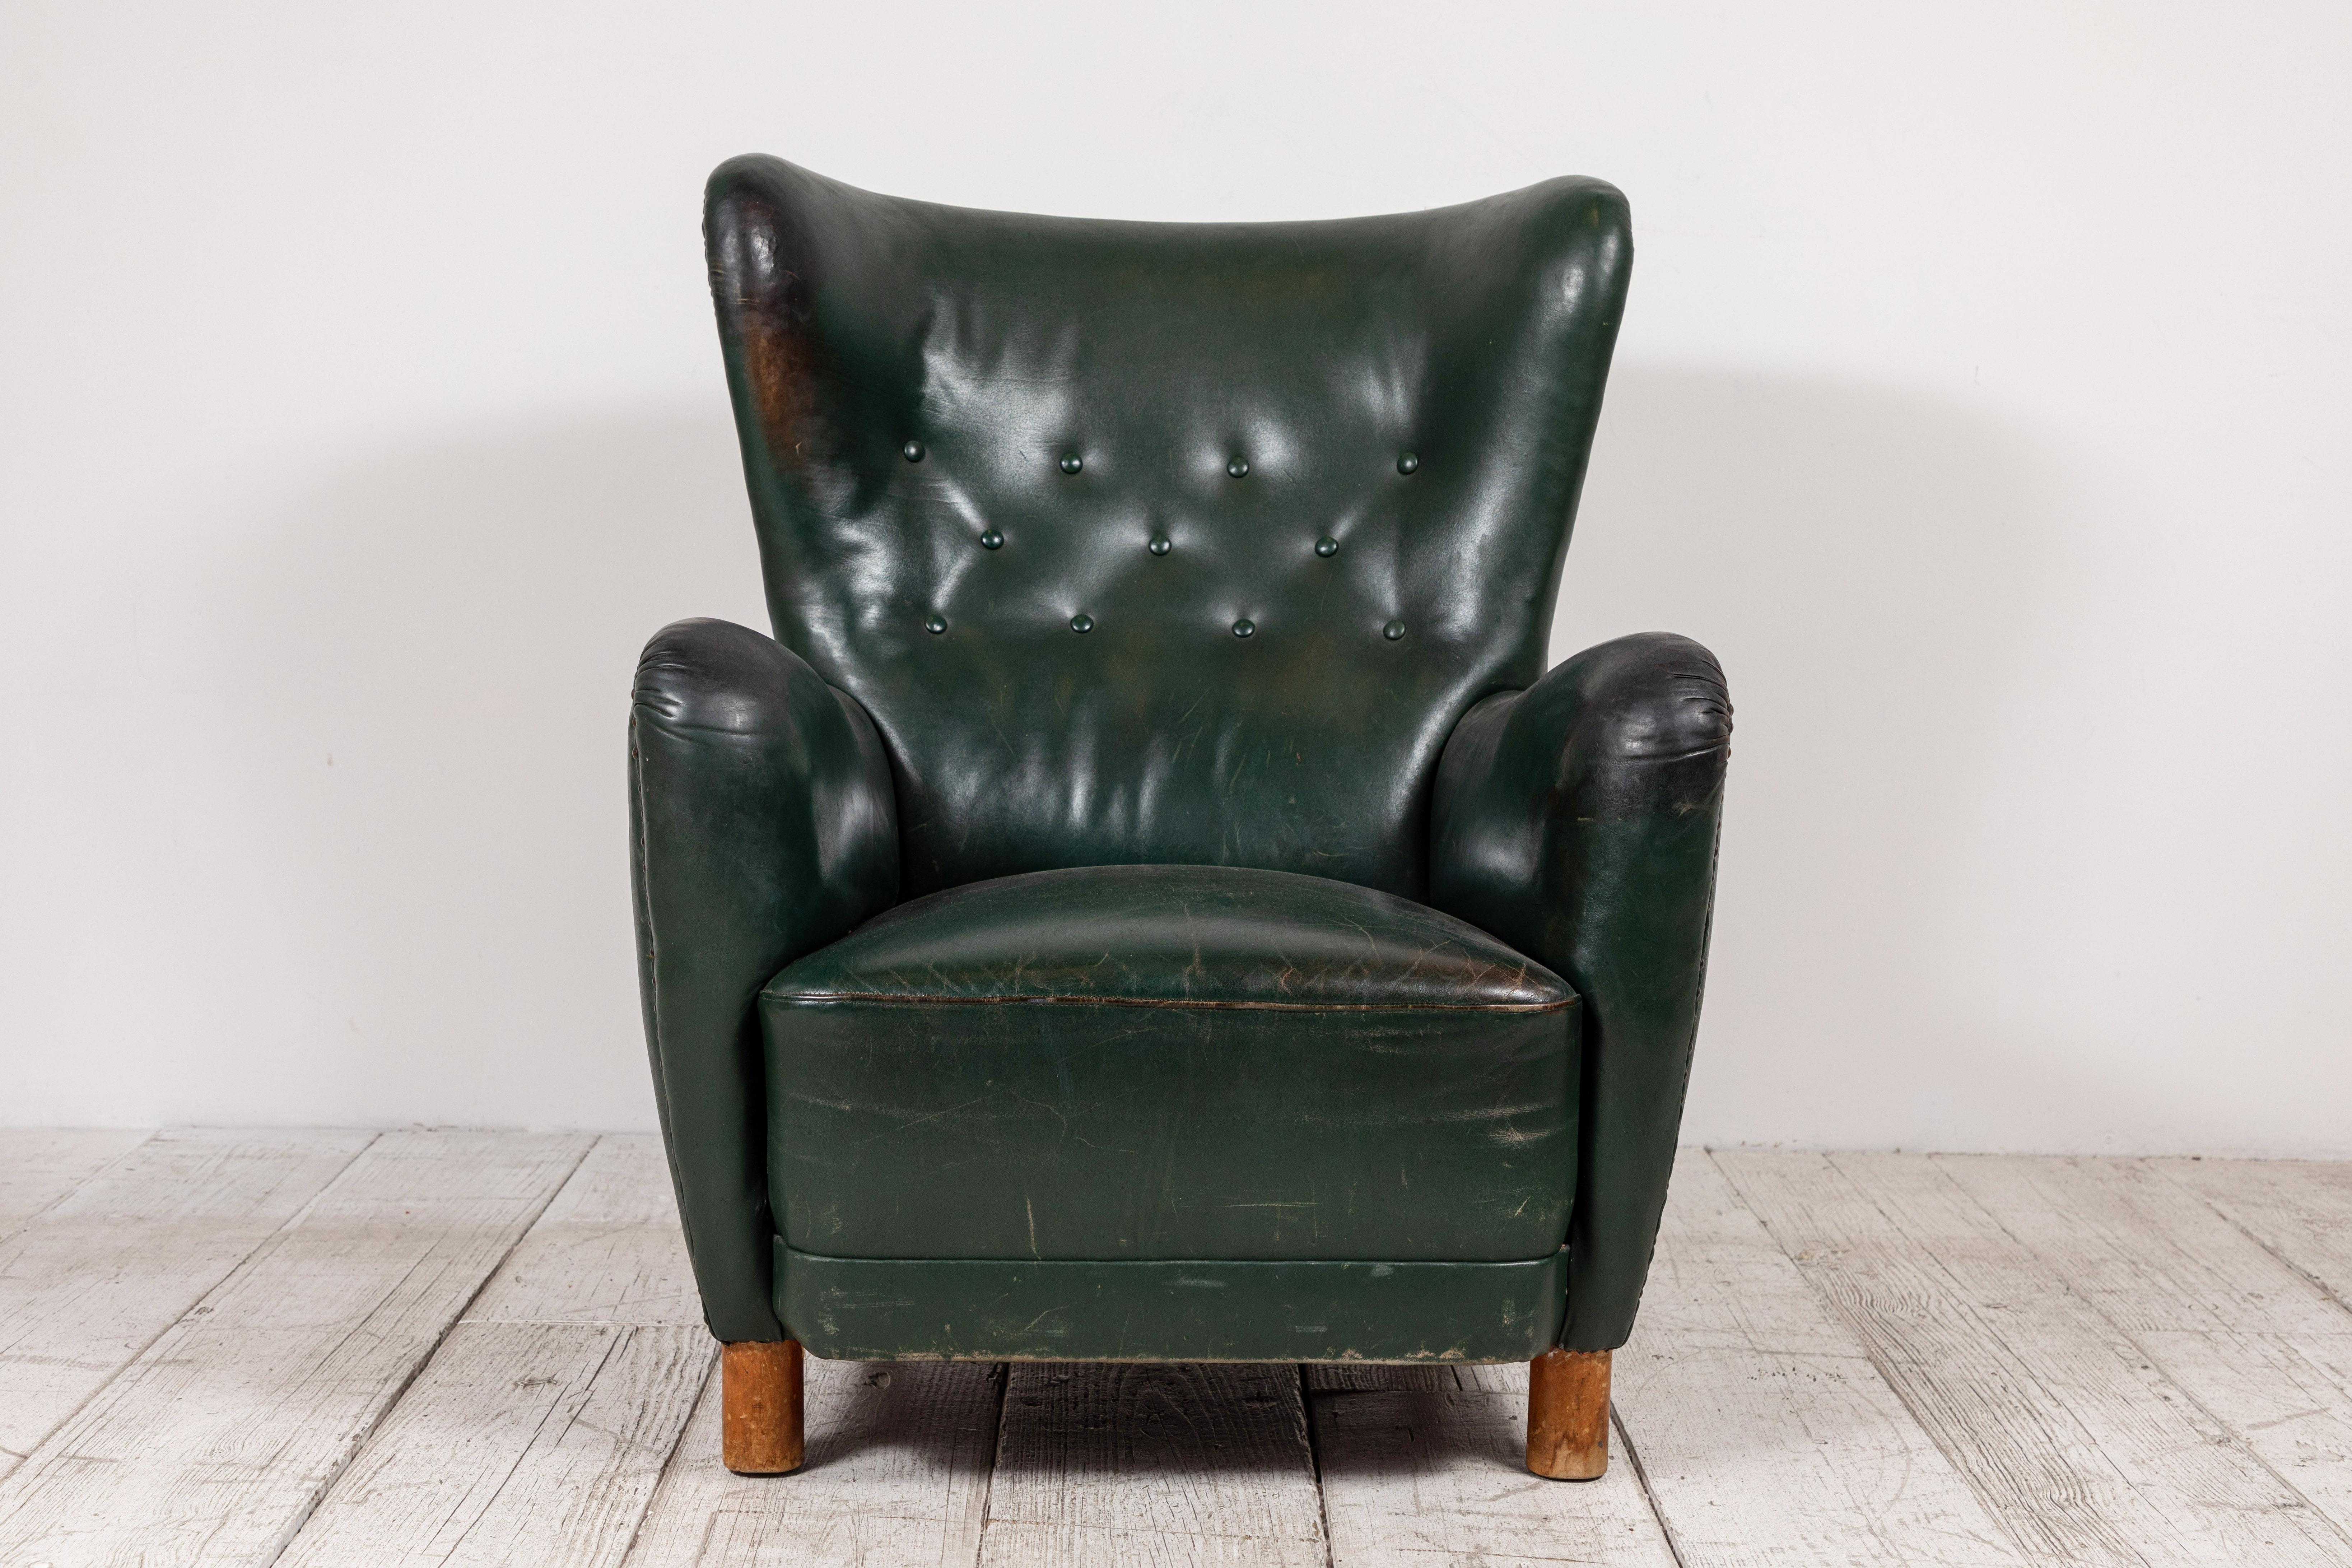 Elegant French green leather wingback chair with button details. The chair has been fully restored and it in excellent vintage condition. Legs are original which adds to the one of a kind character.